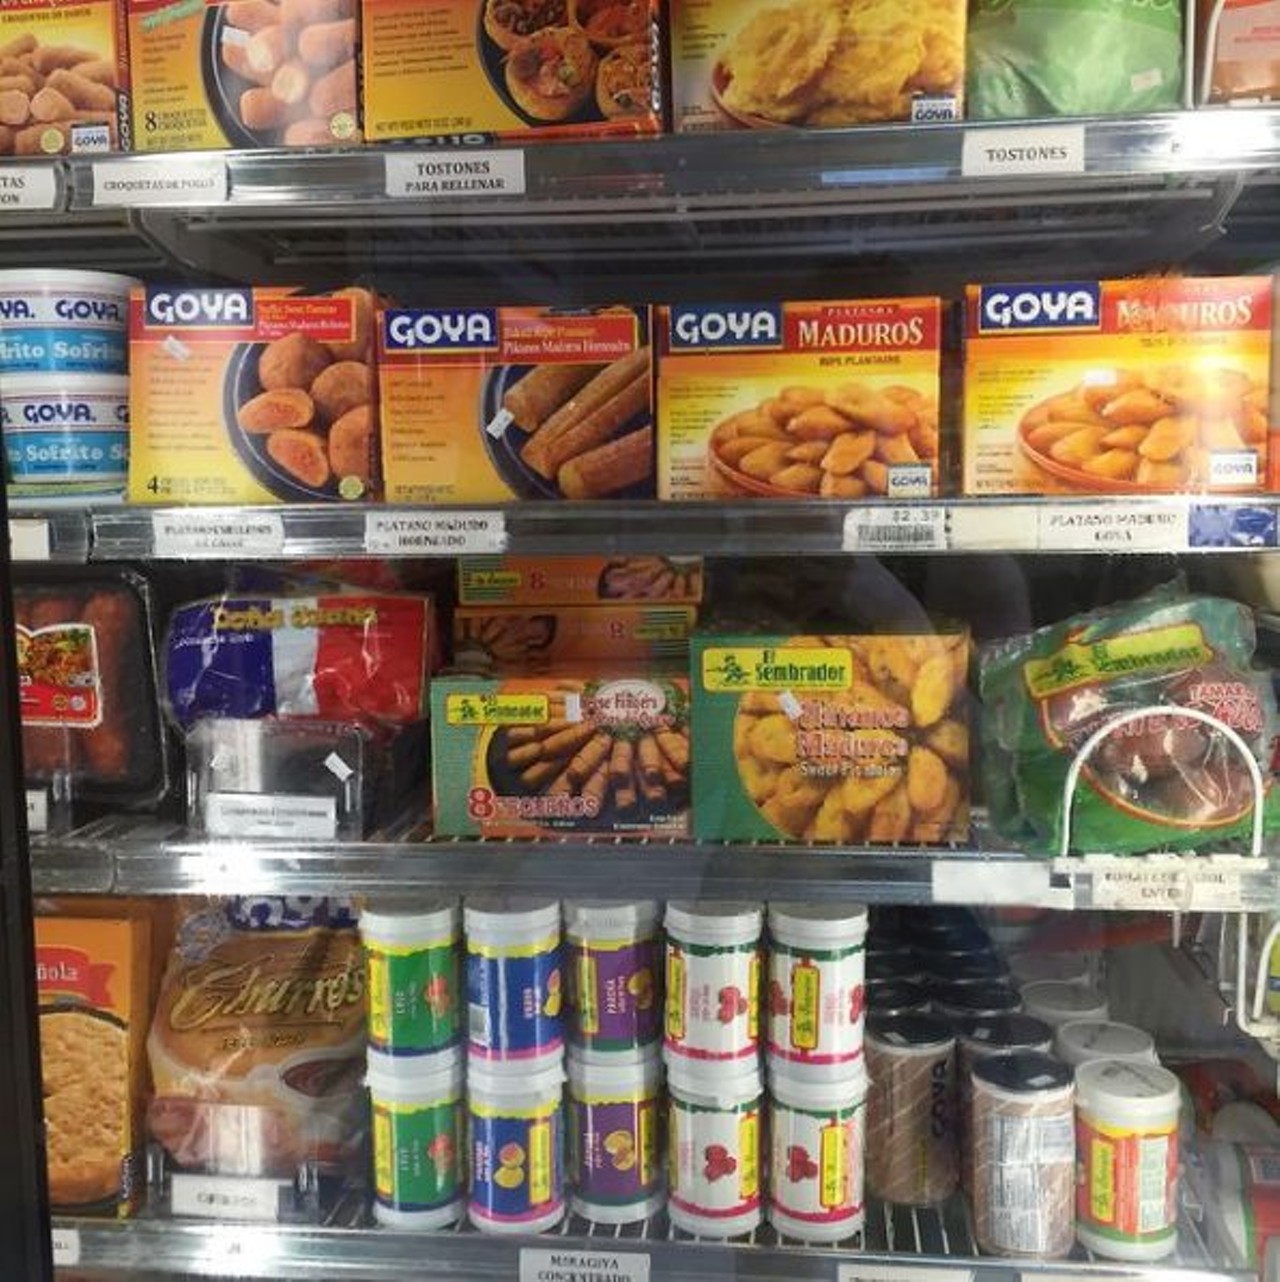 Las Americas Latin Market
6623 San Pedro Ave., (210) 340-2747, lasamericaslatinmarket.com
Why settle for just an aisle of Goya products when you can have an entire market full of them?
Photo via Instagram, crystalpoenisch